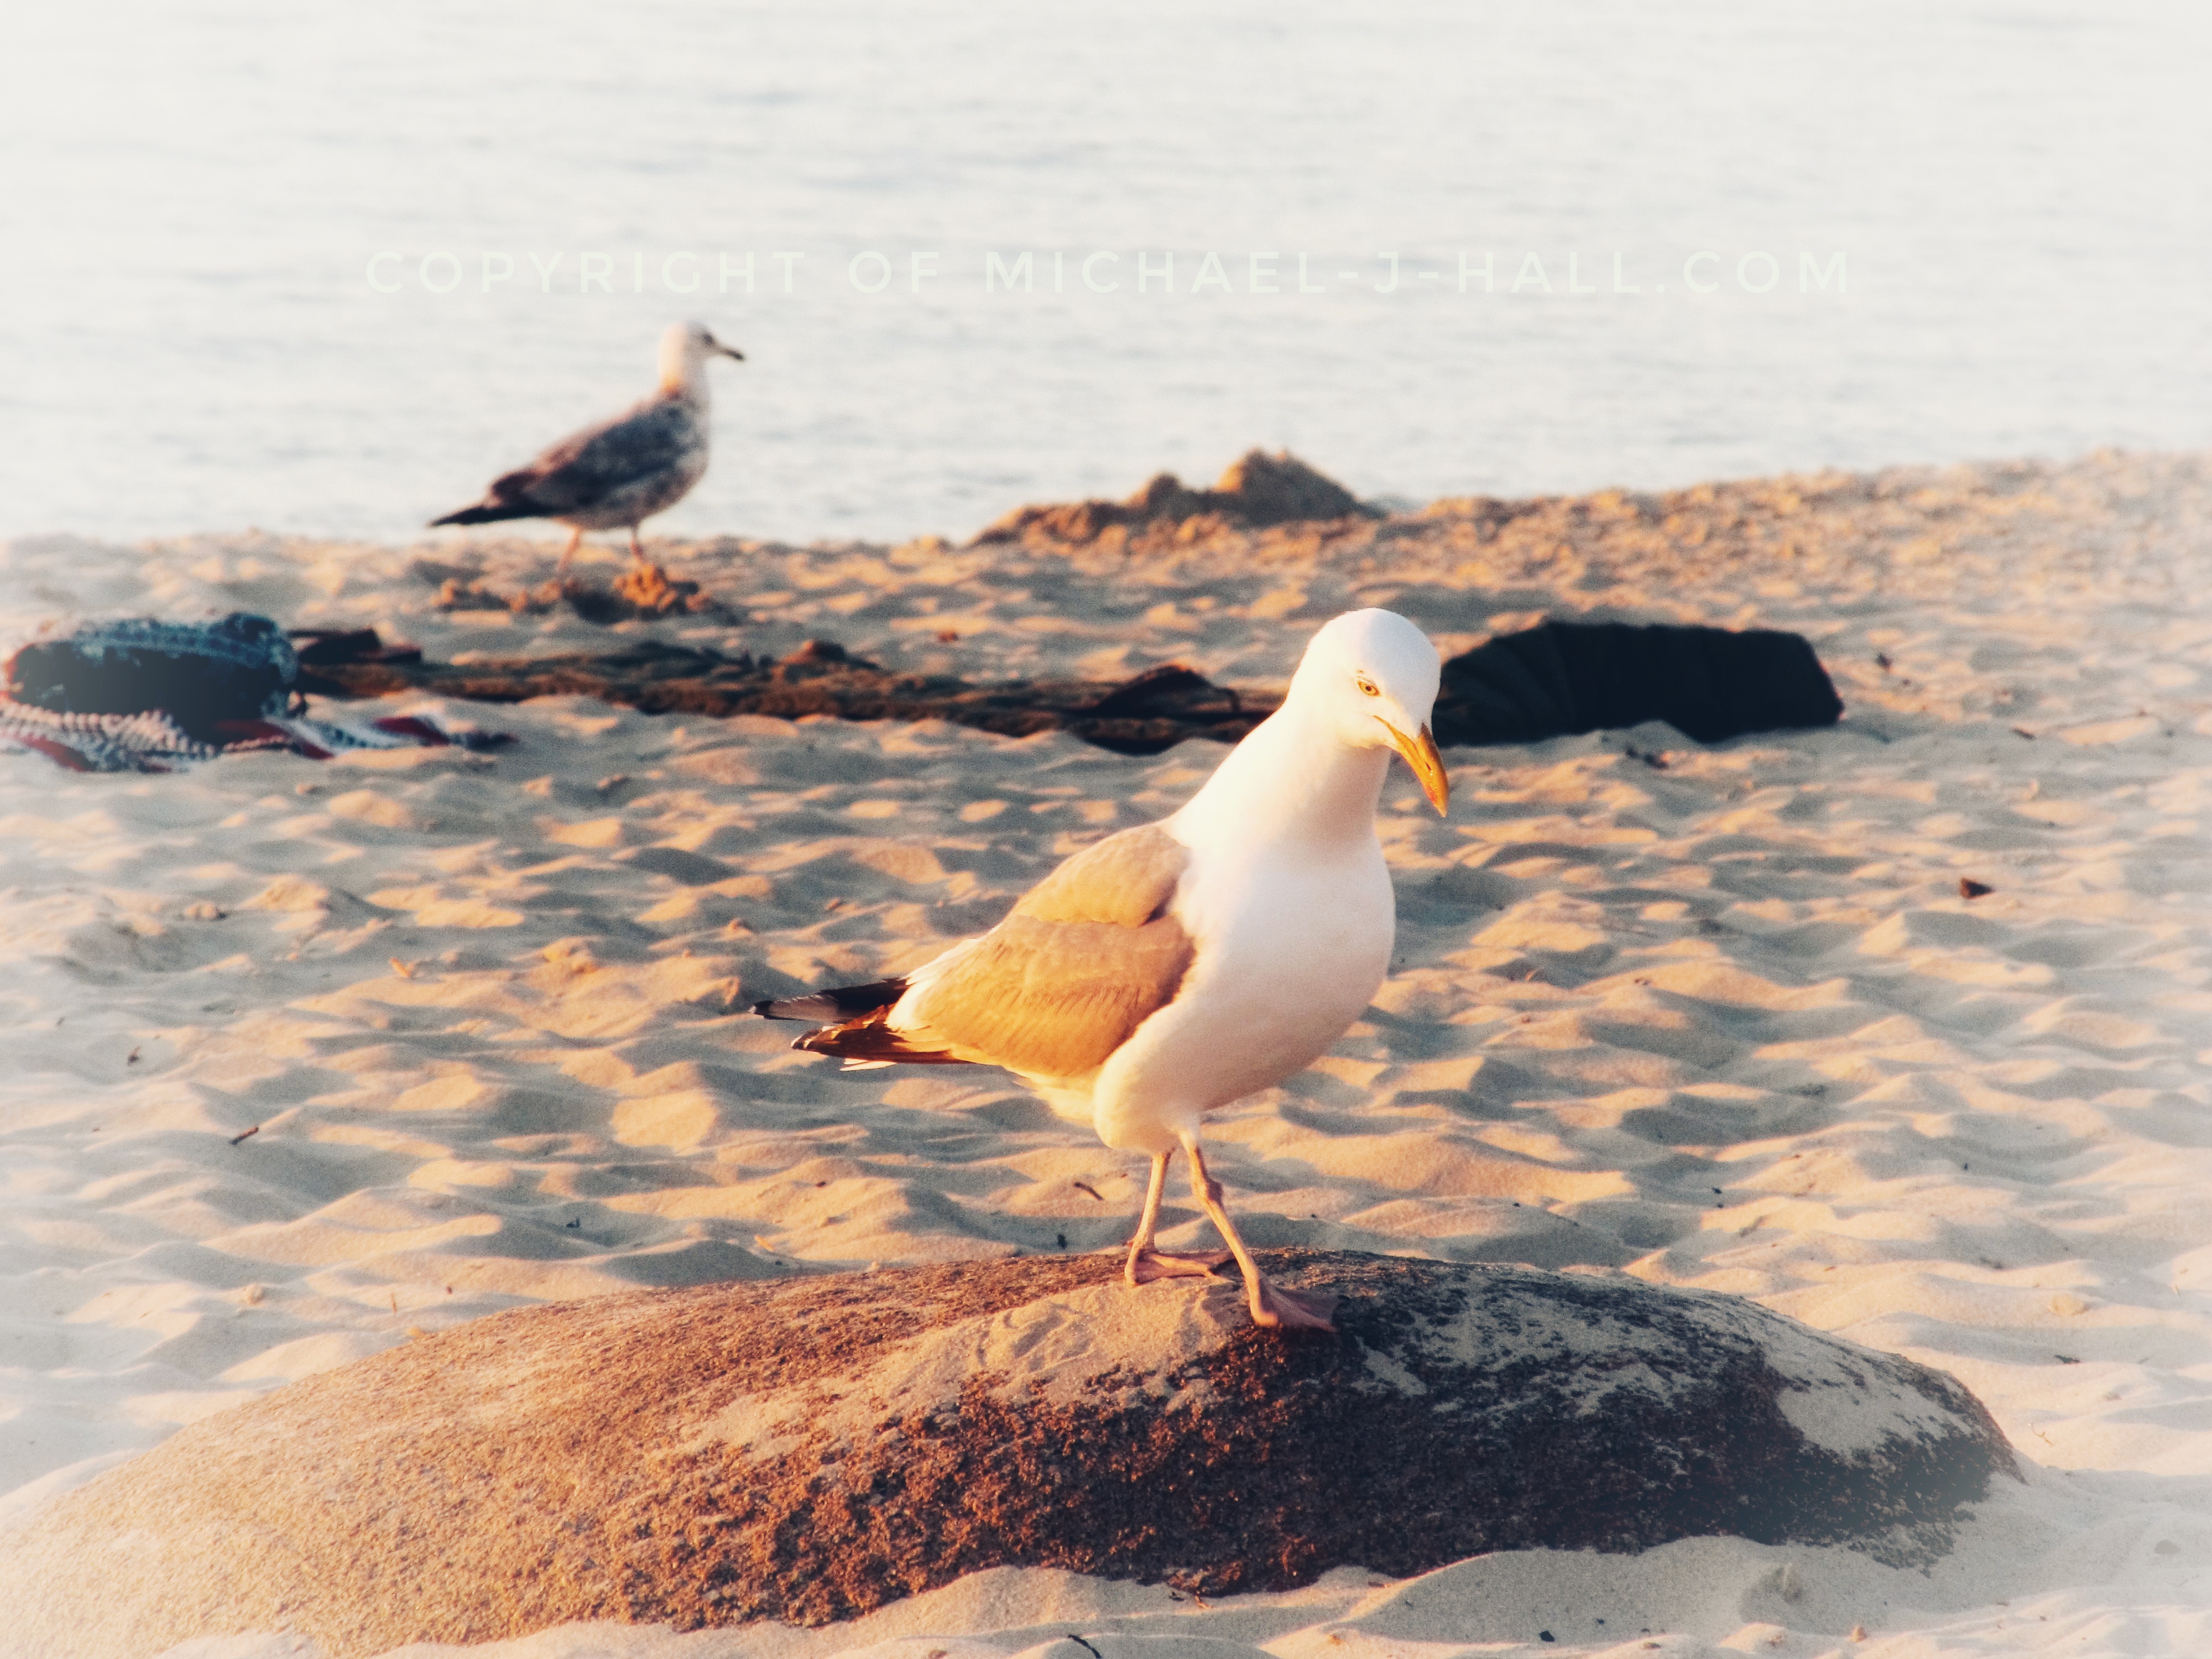 A smooth-feathered herring gull struts across the rough surface of a stone slab inspecting the surrounding sands for the last tempting morsels of the day to share with its mate lurking nearby.